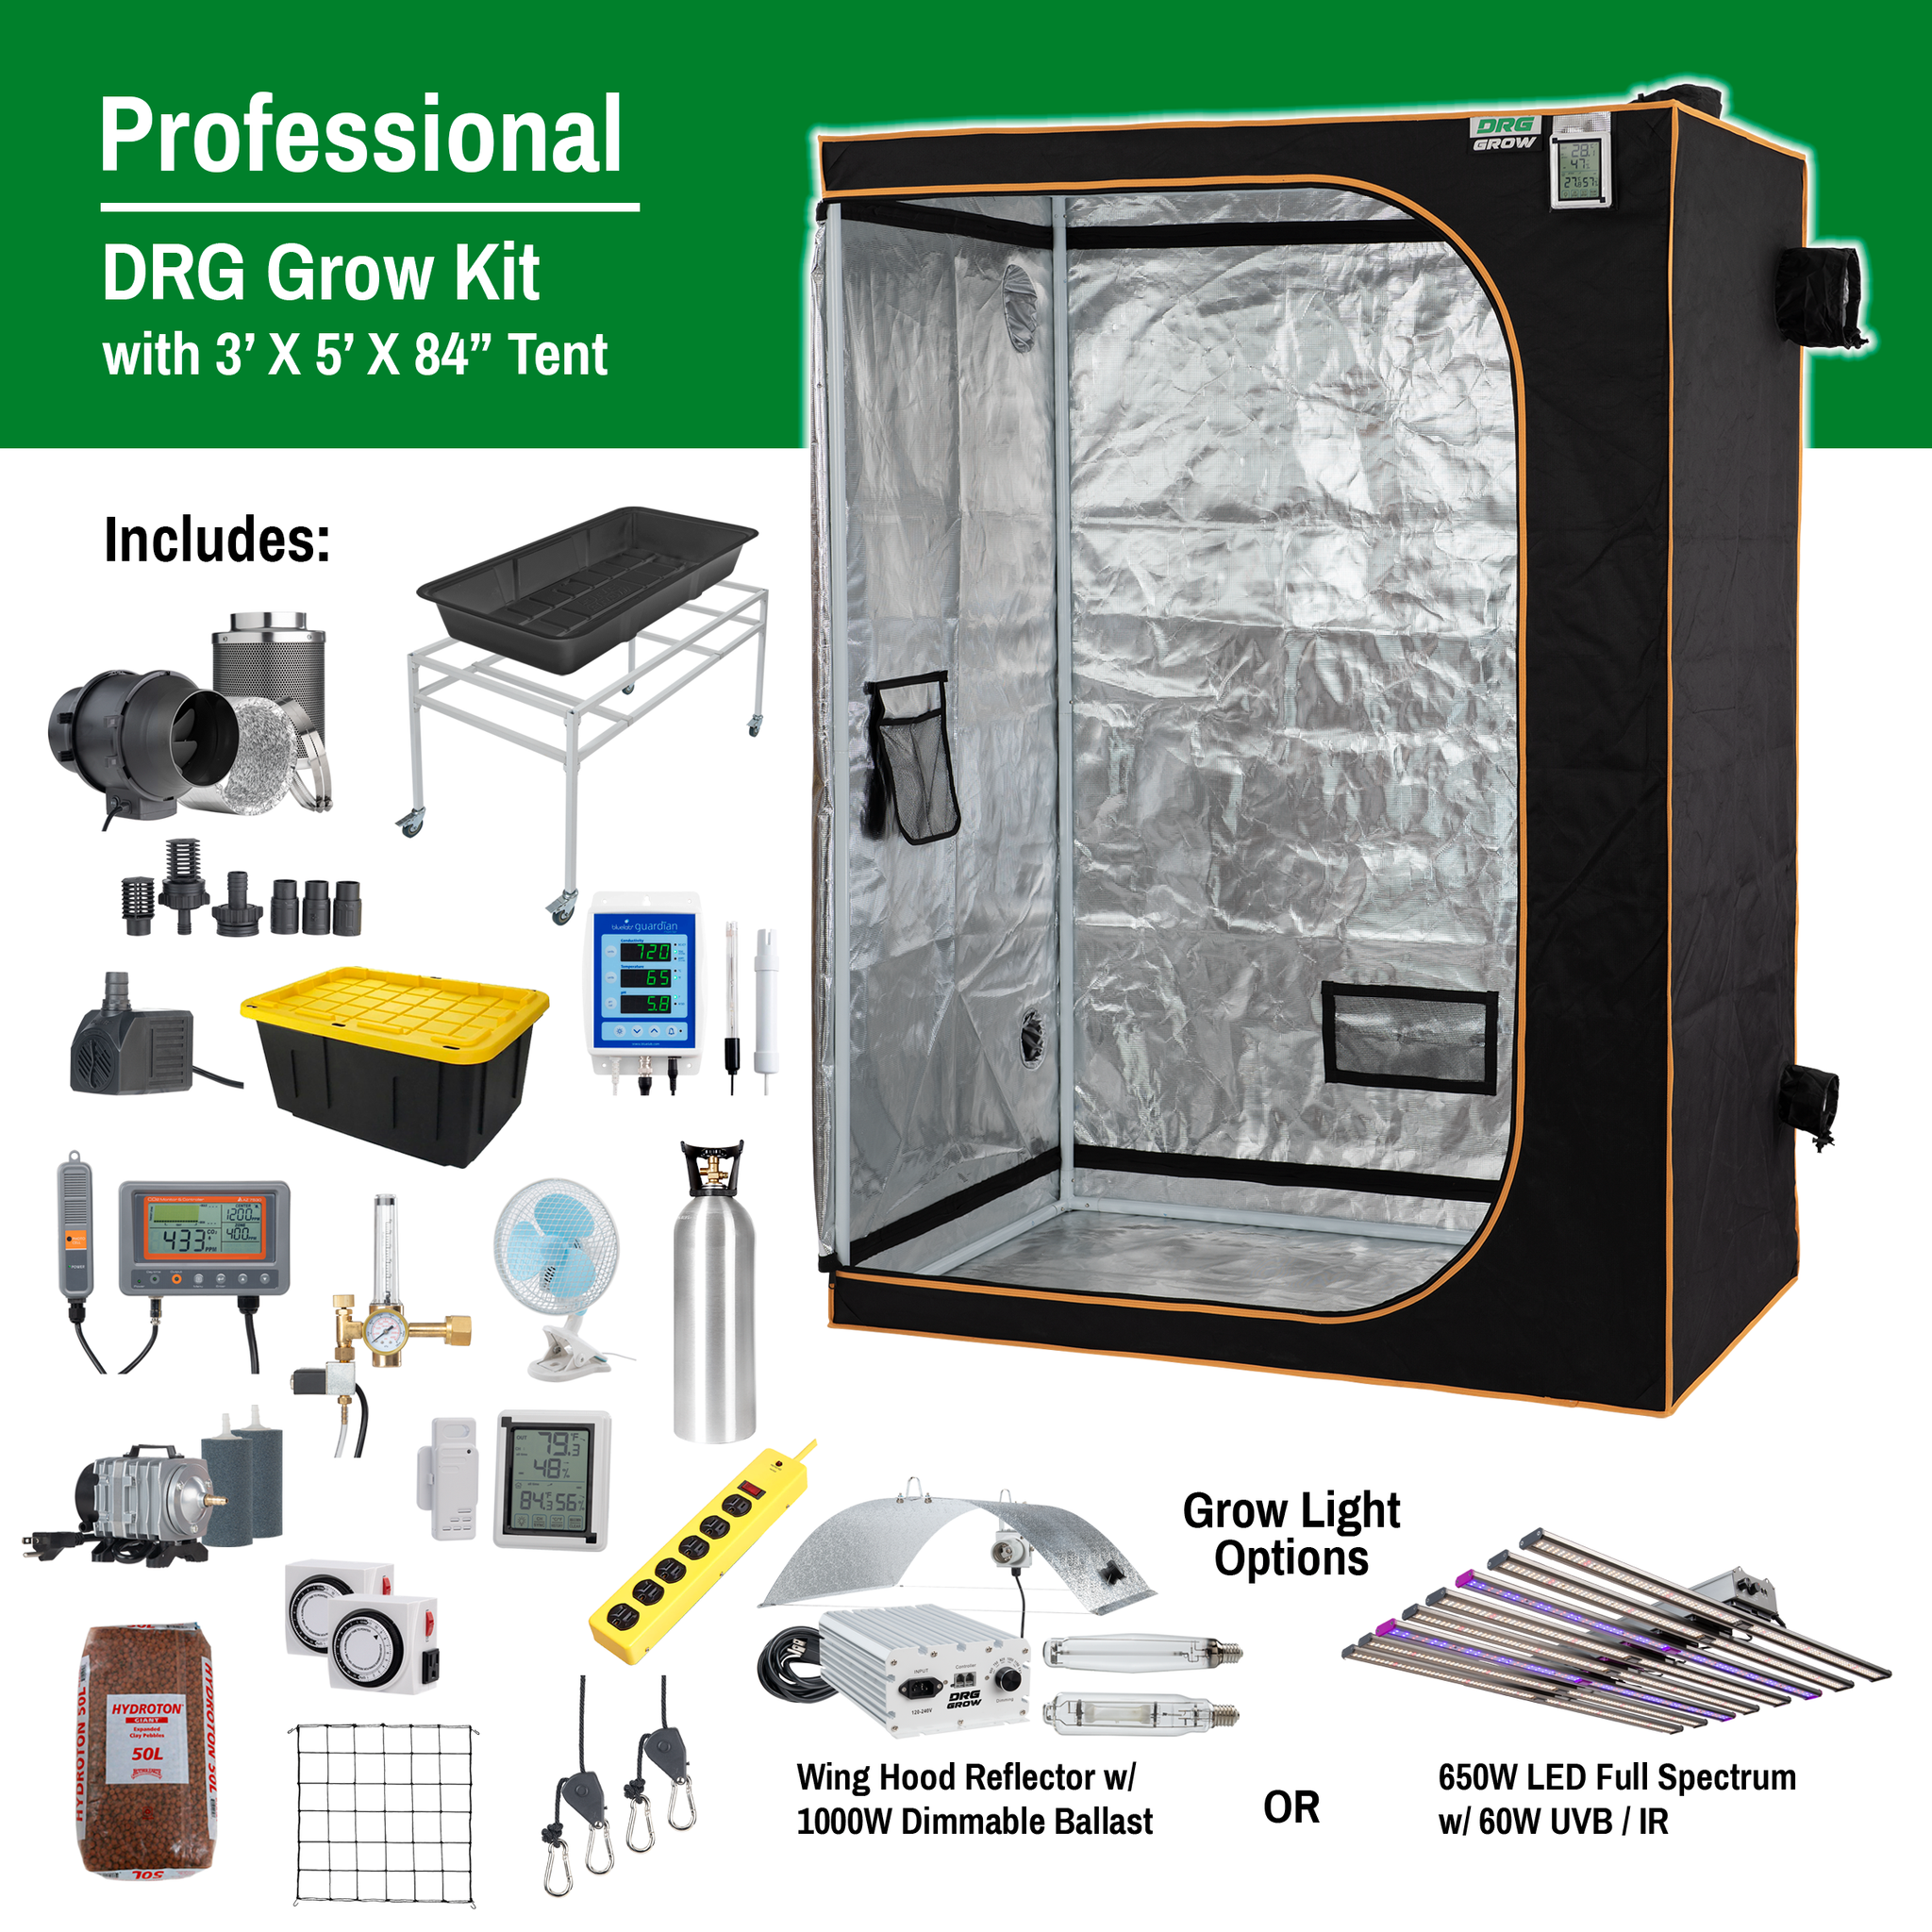 solidaritet Perennial forbandelse Professional DRG Grow Kit w/ 3'x5' Tent and Accessories – DRG GROW